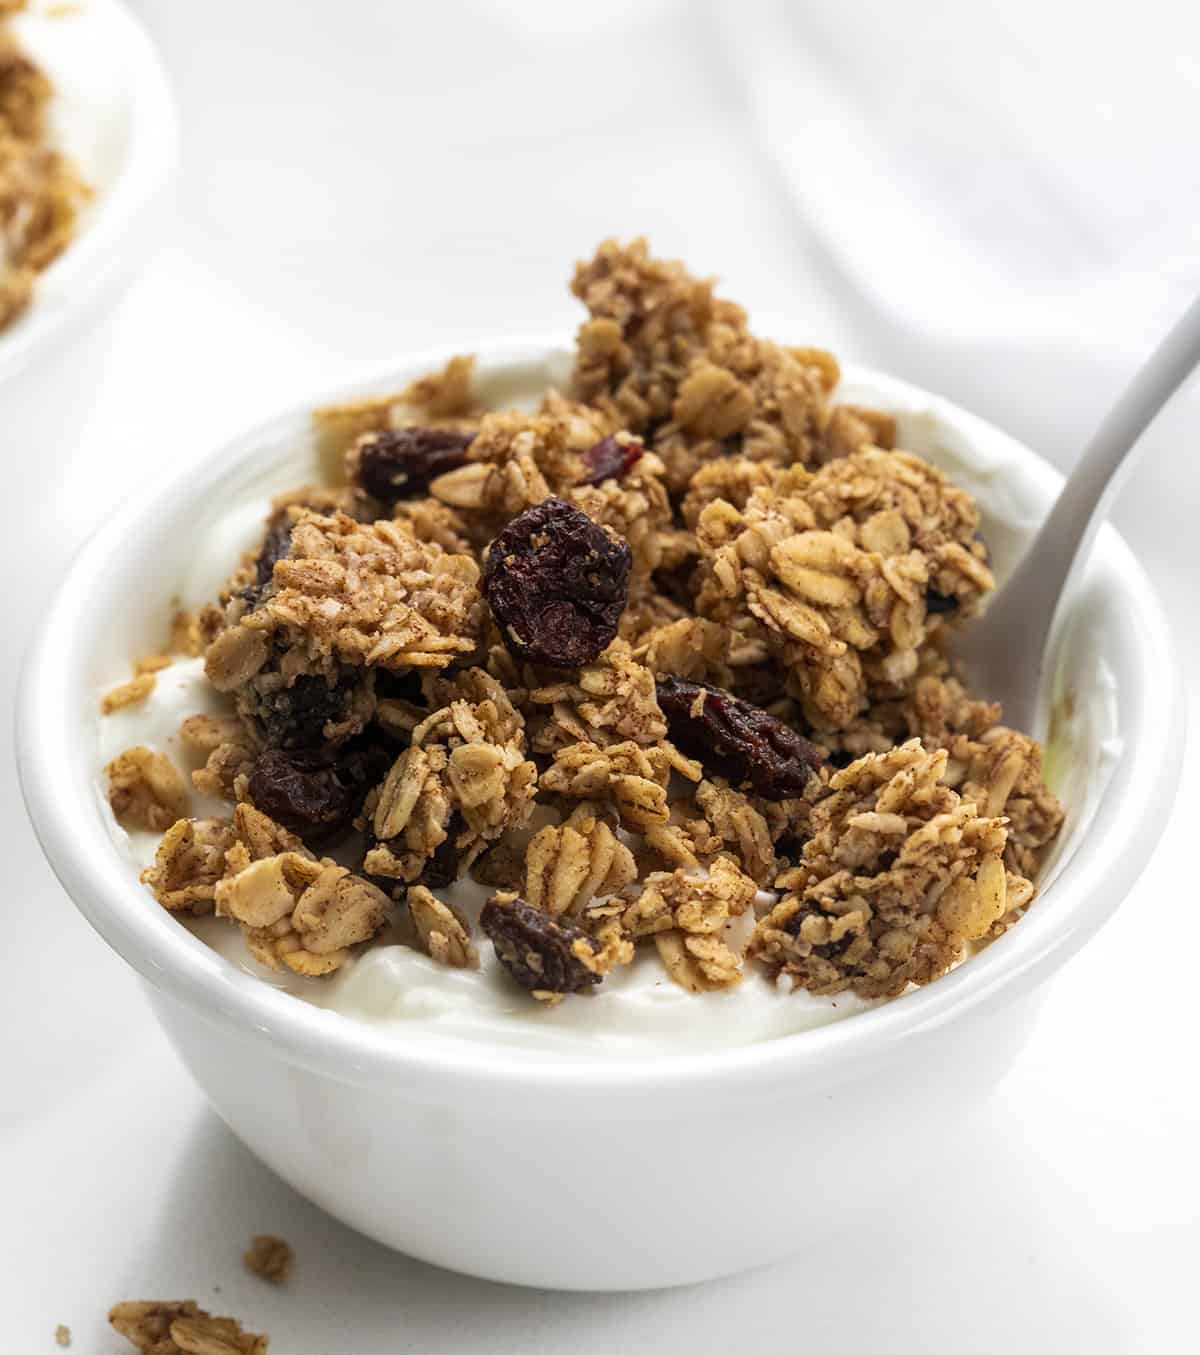 Bowl of Yogurt with Homemade Granola in it and a White Spoon